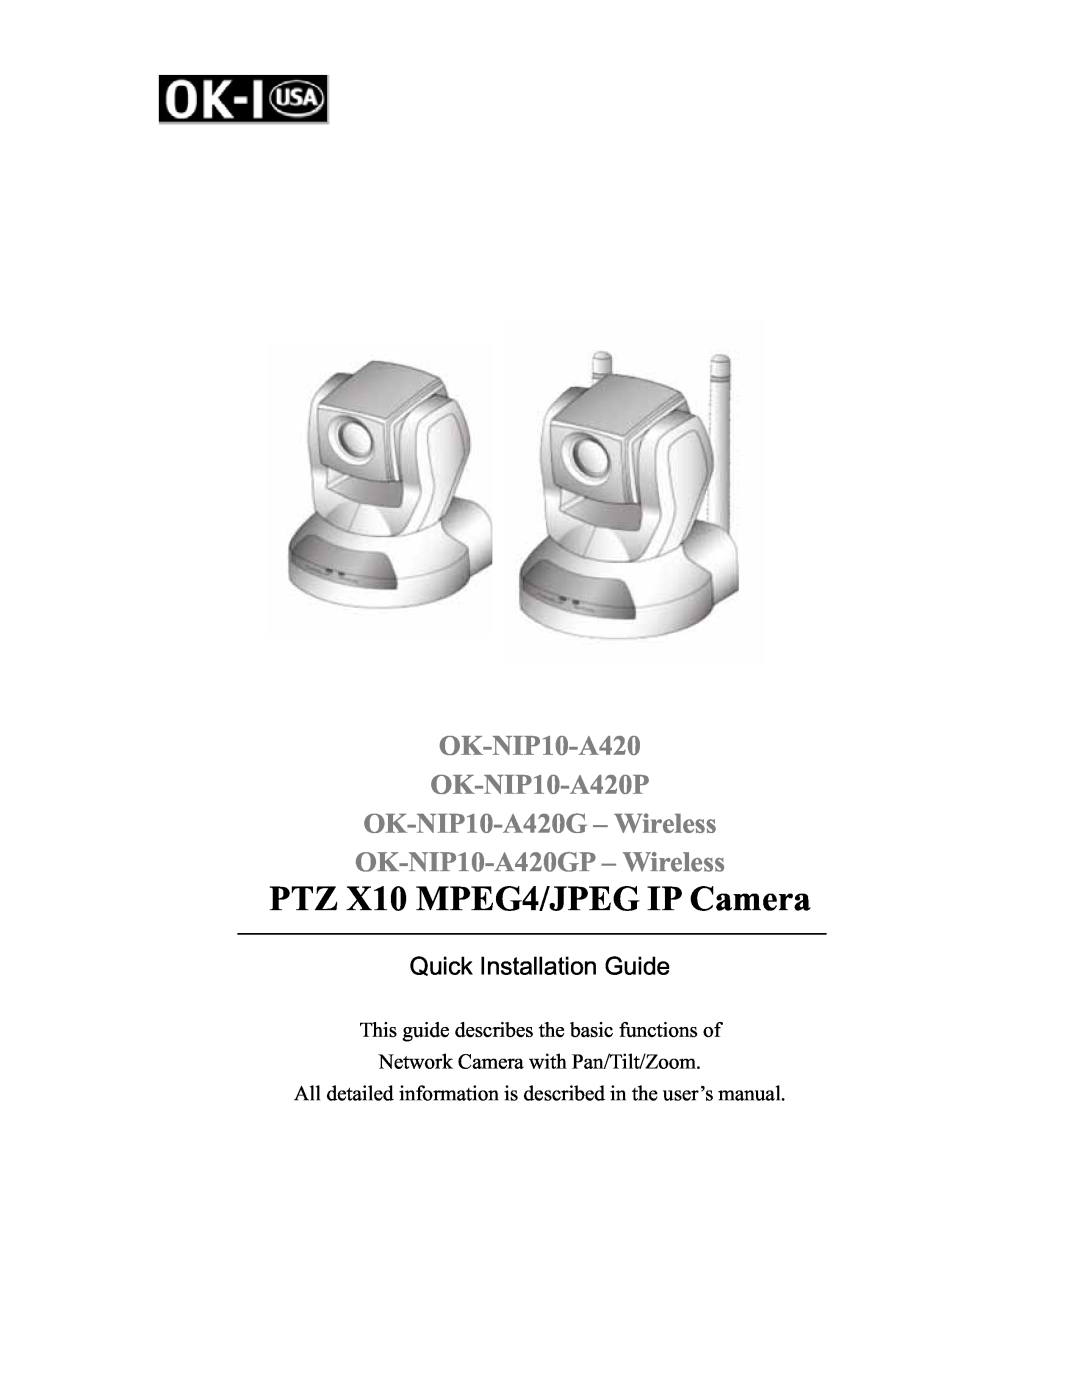 Oki OK-NIP10-A420P user manual This guide describes the basic functions of, Network Camera with Pan/Tilt/Zoom 